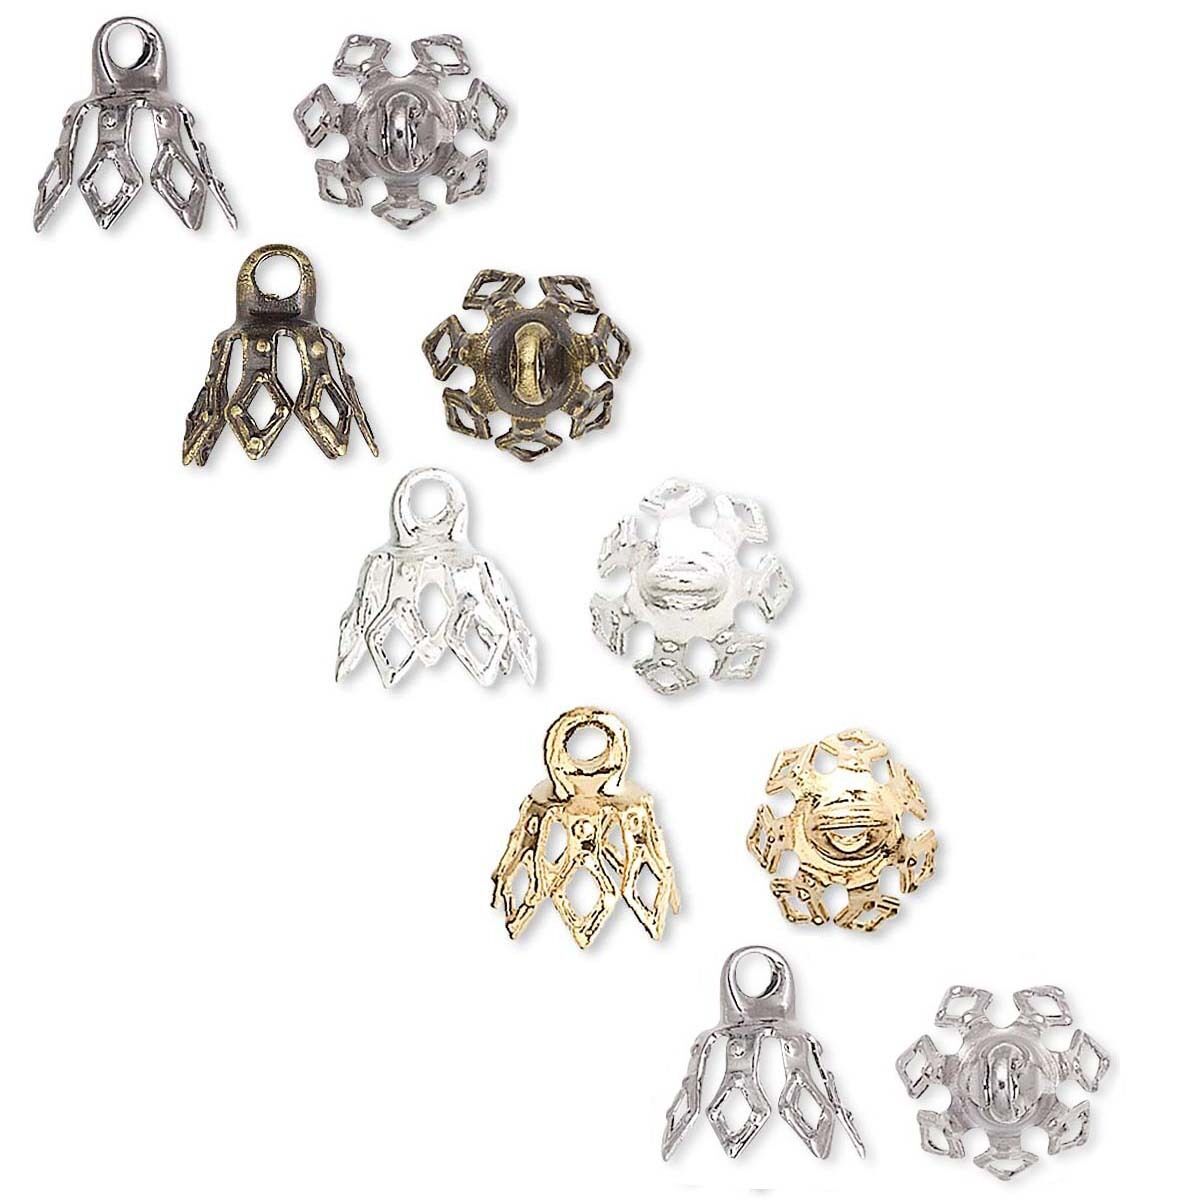 10 Bell Bead End Charm Caps With Loop & 7 Filigree Prong Legs Plated Brass Metal